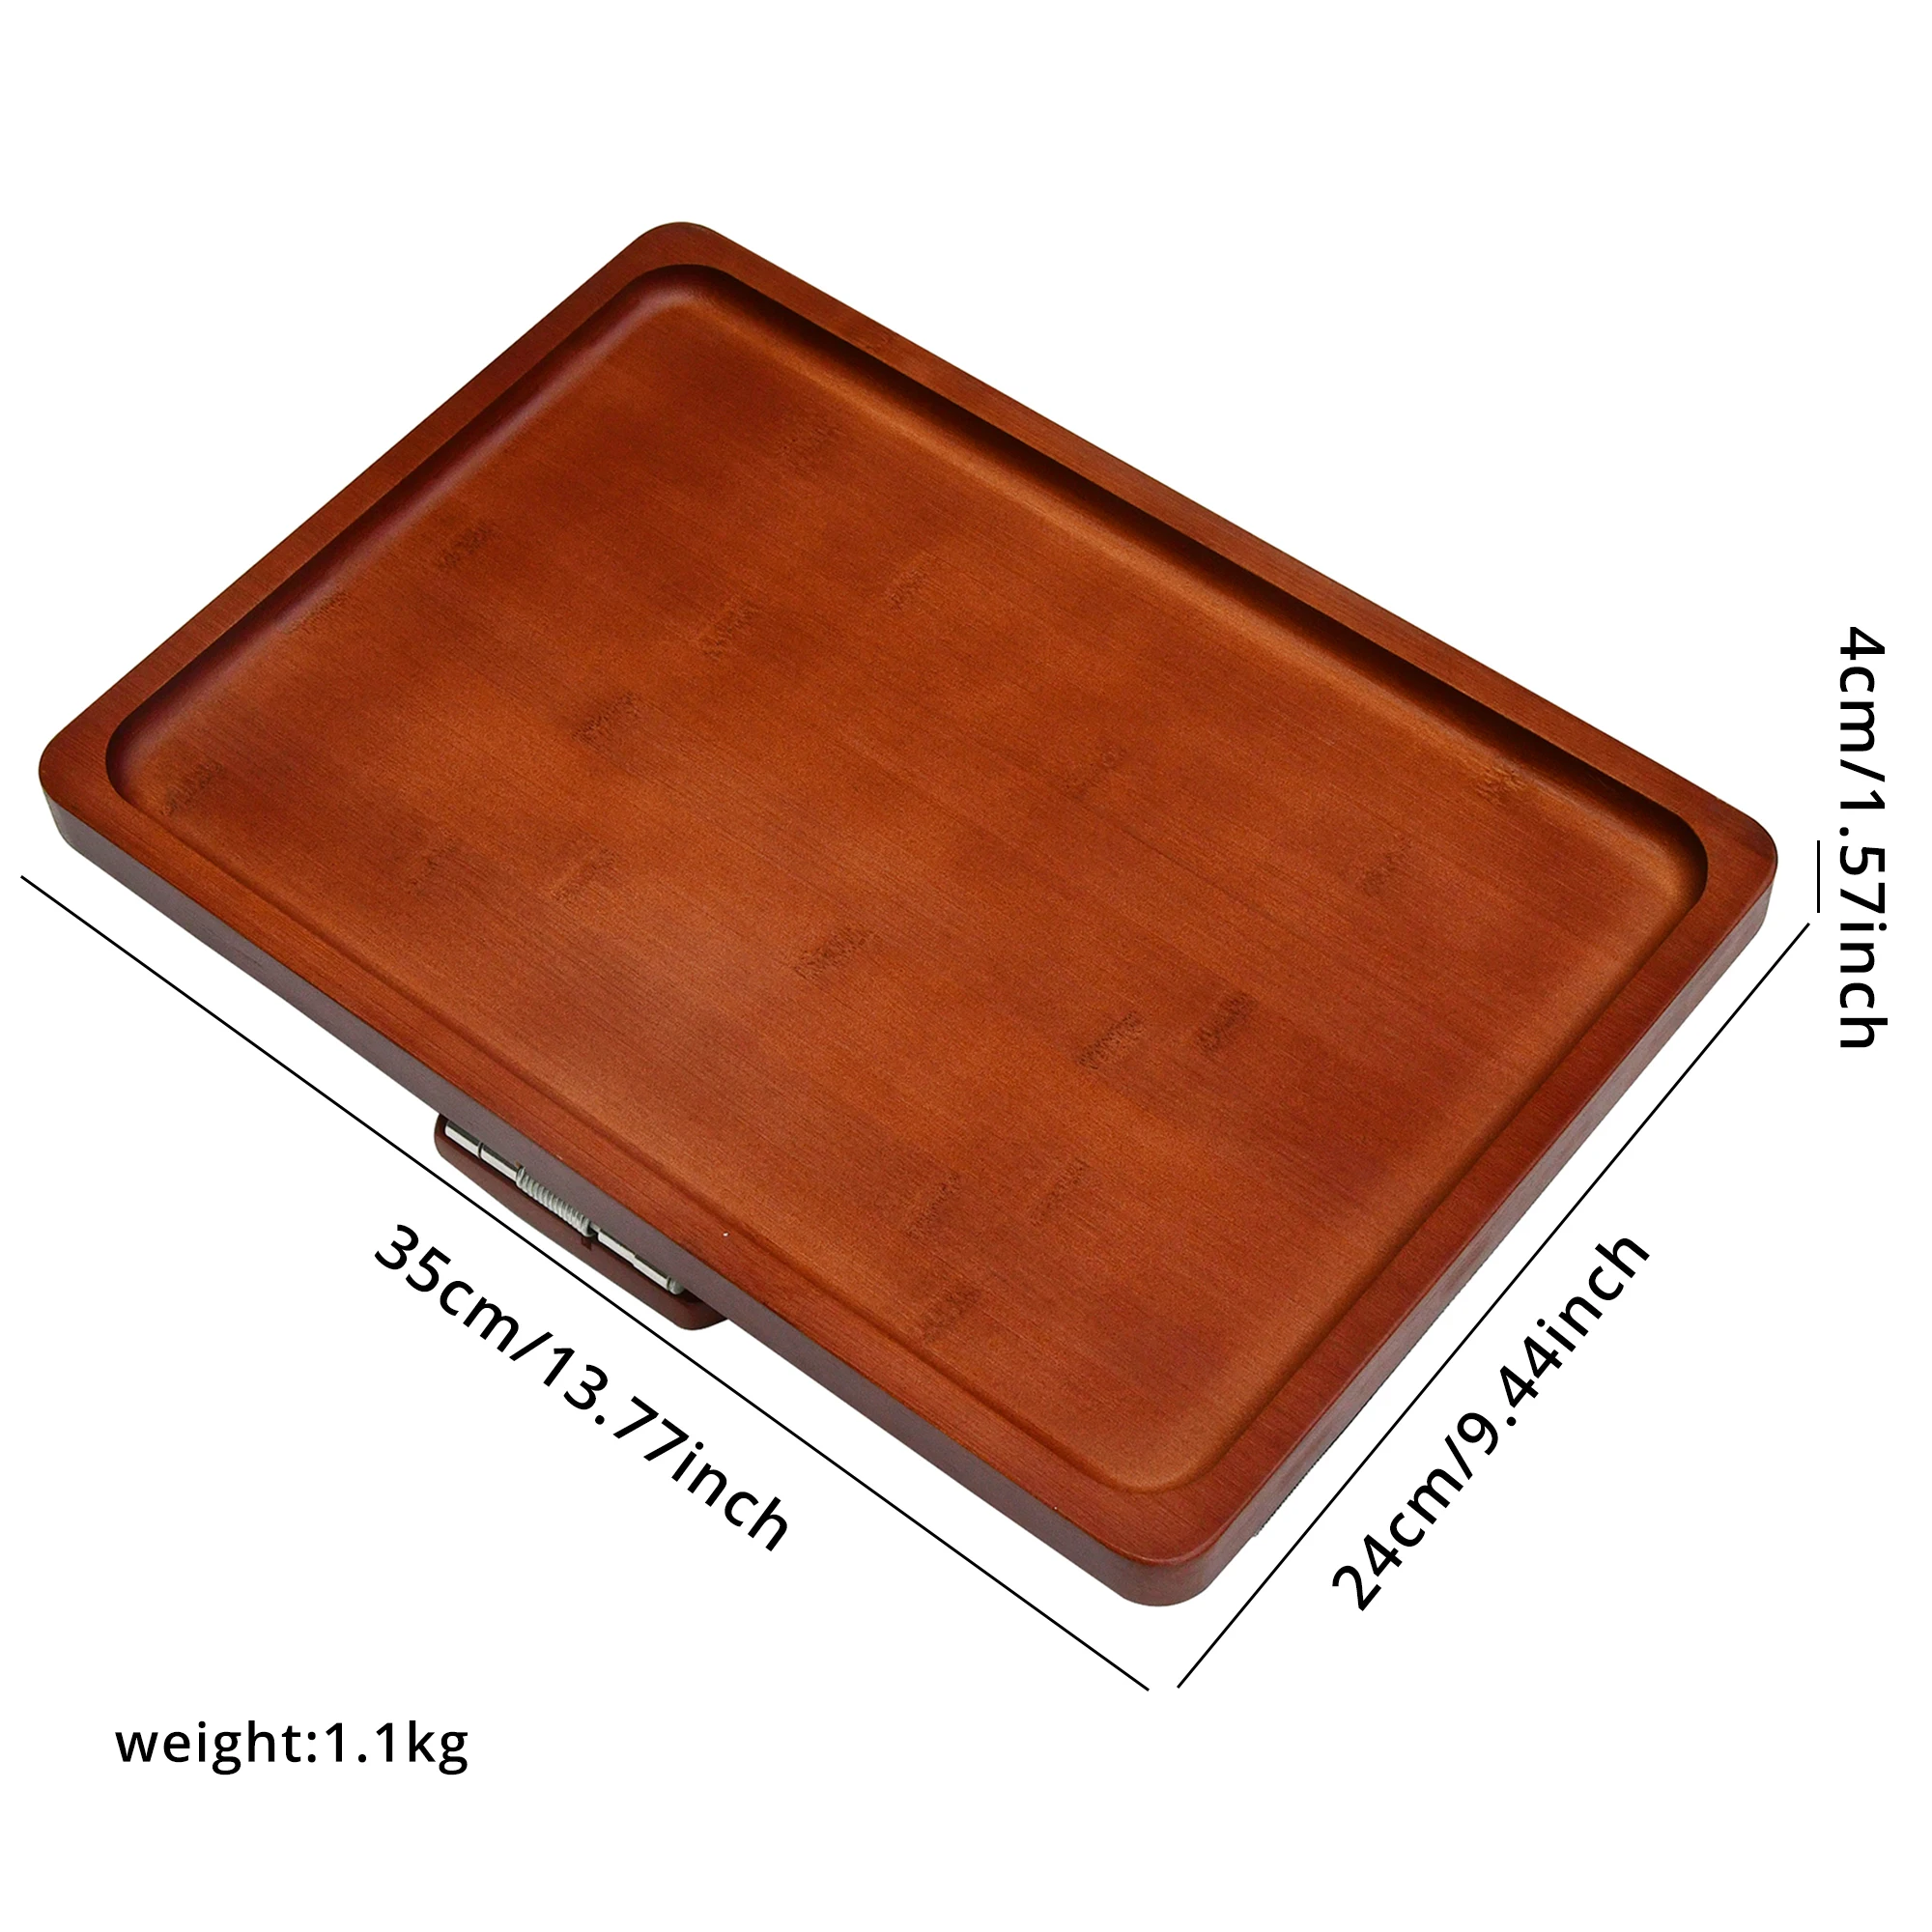 Wholesale Bamboo Sofa Arm Tray Table,  Foldable Clip-on Armrest, Wooden Snack Caddy Couch Organizer for Eating/Drinks/Snacks